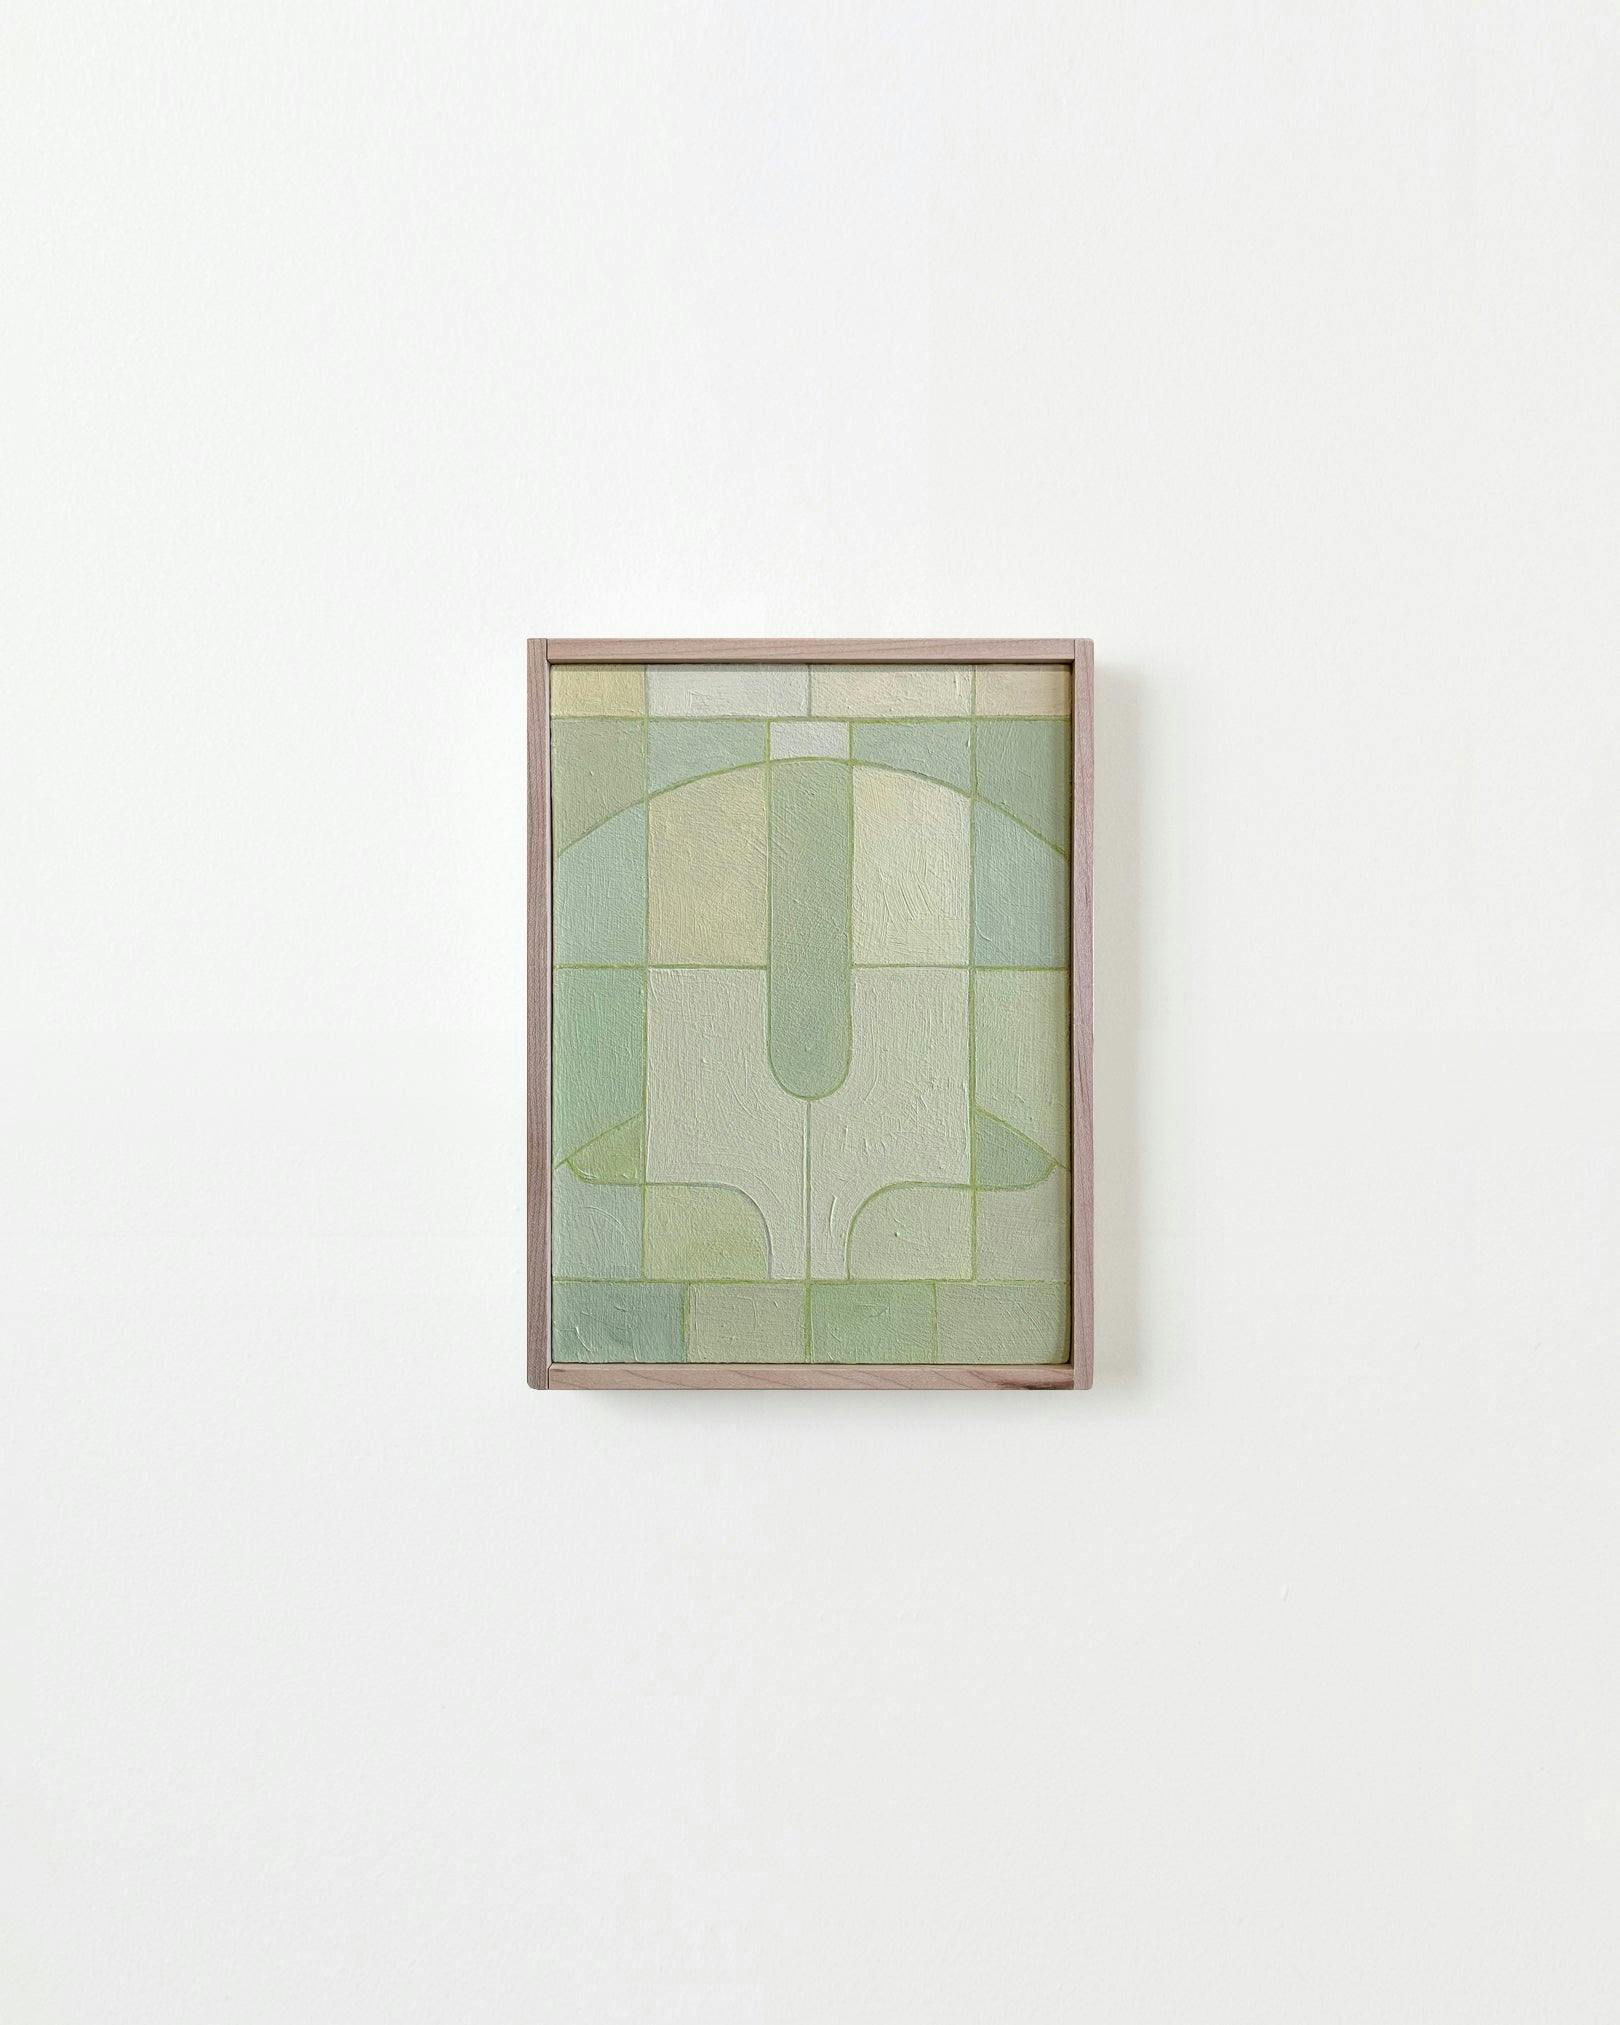 Painting by Carla Weeks titled "Stained Glass Study in Green 33".